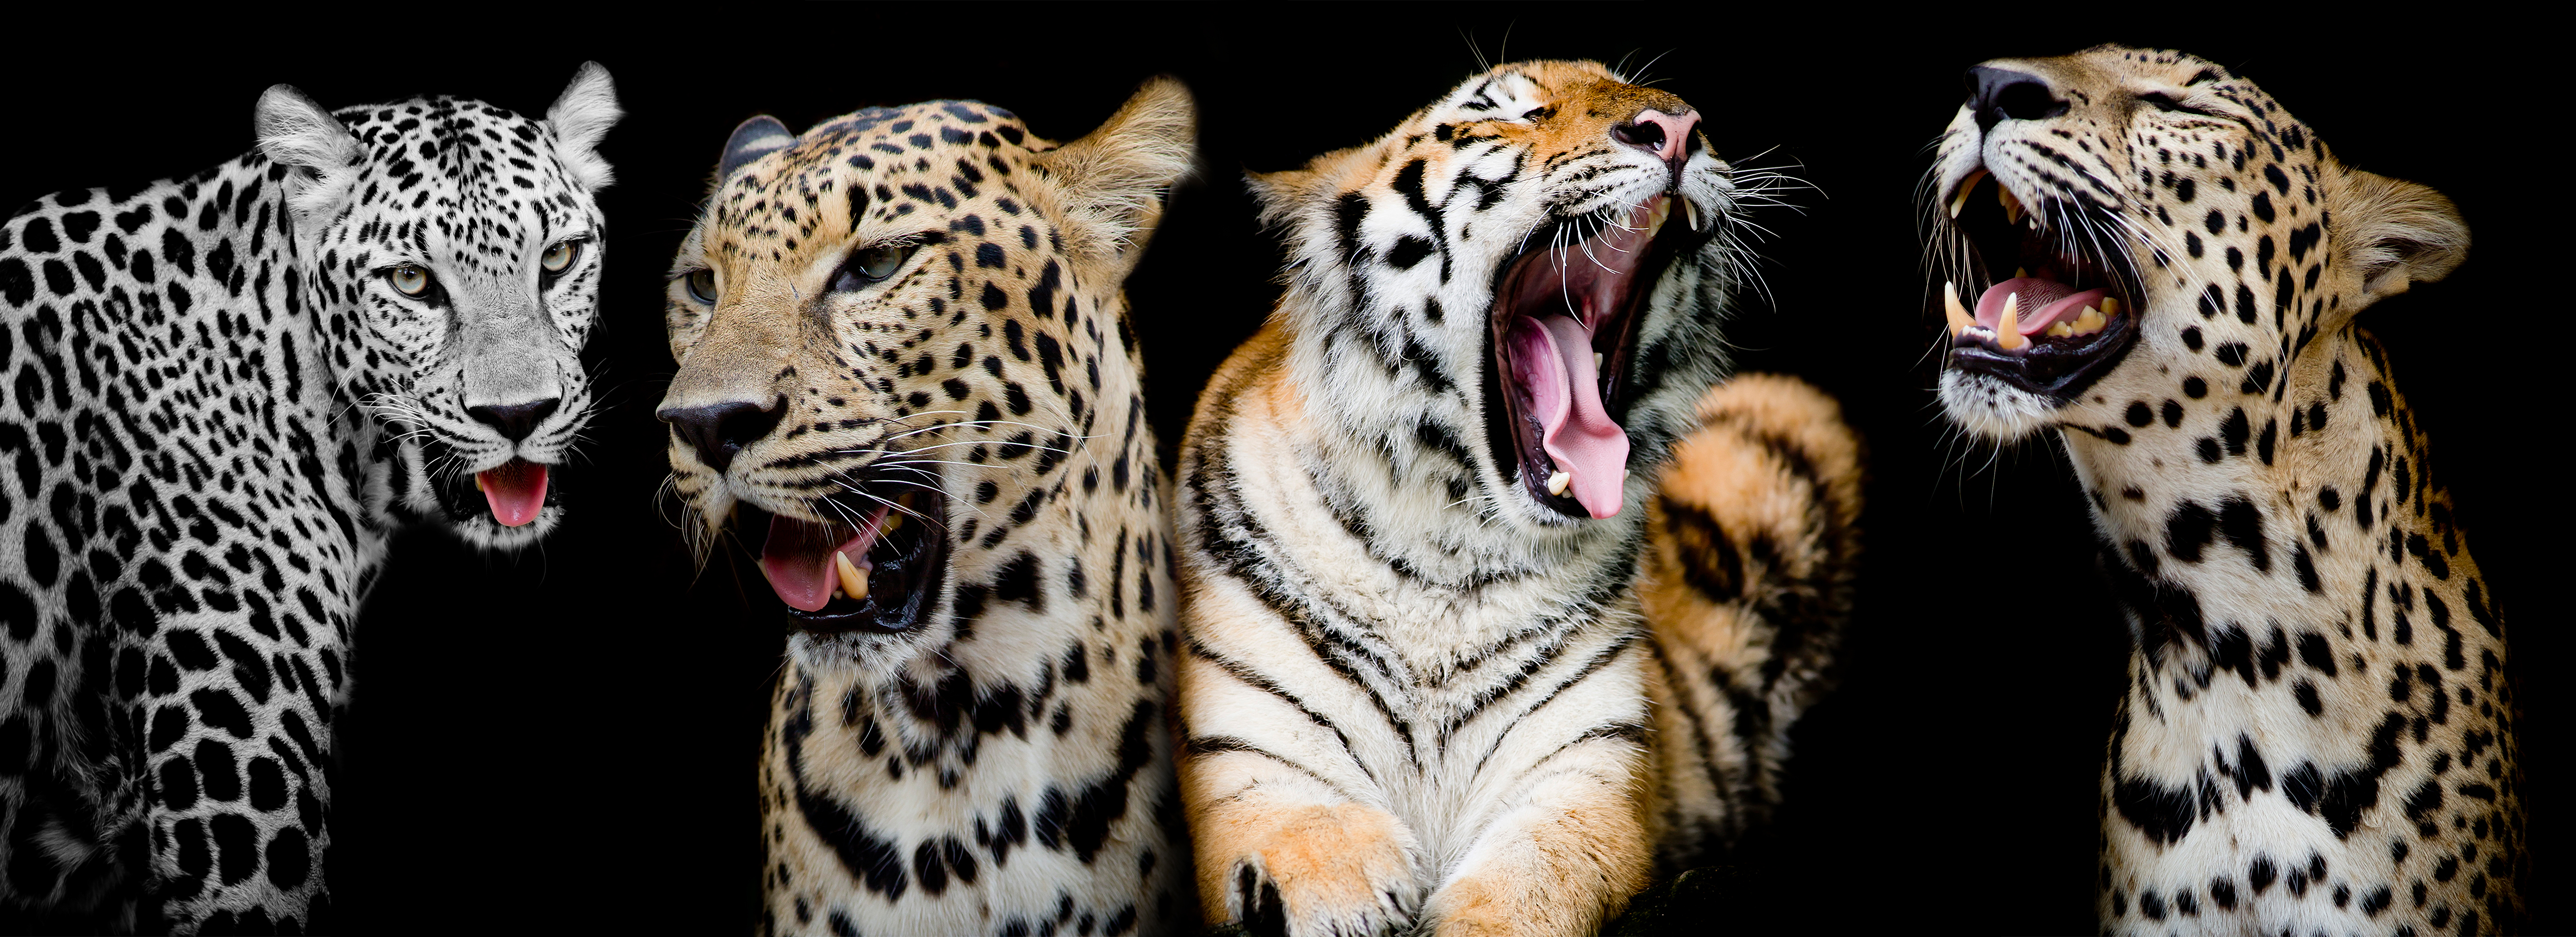 Free photo leopards and tiger